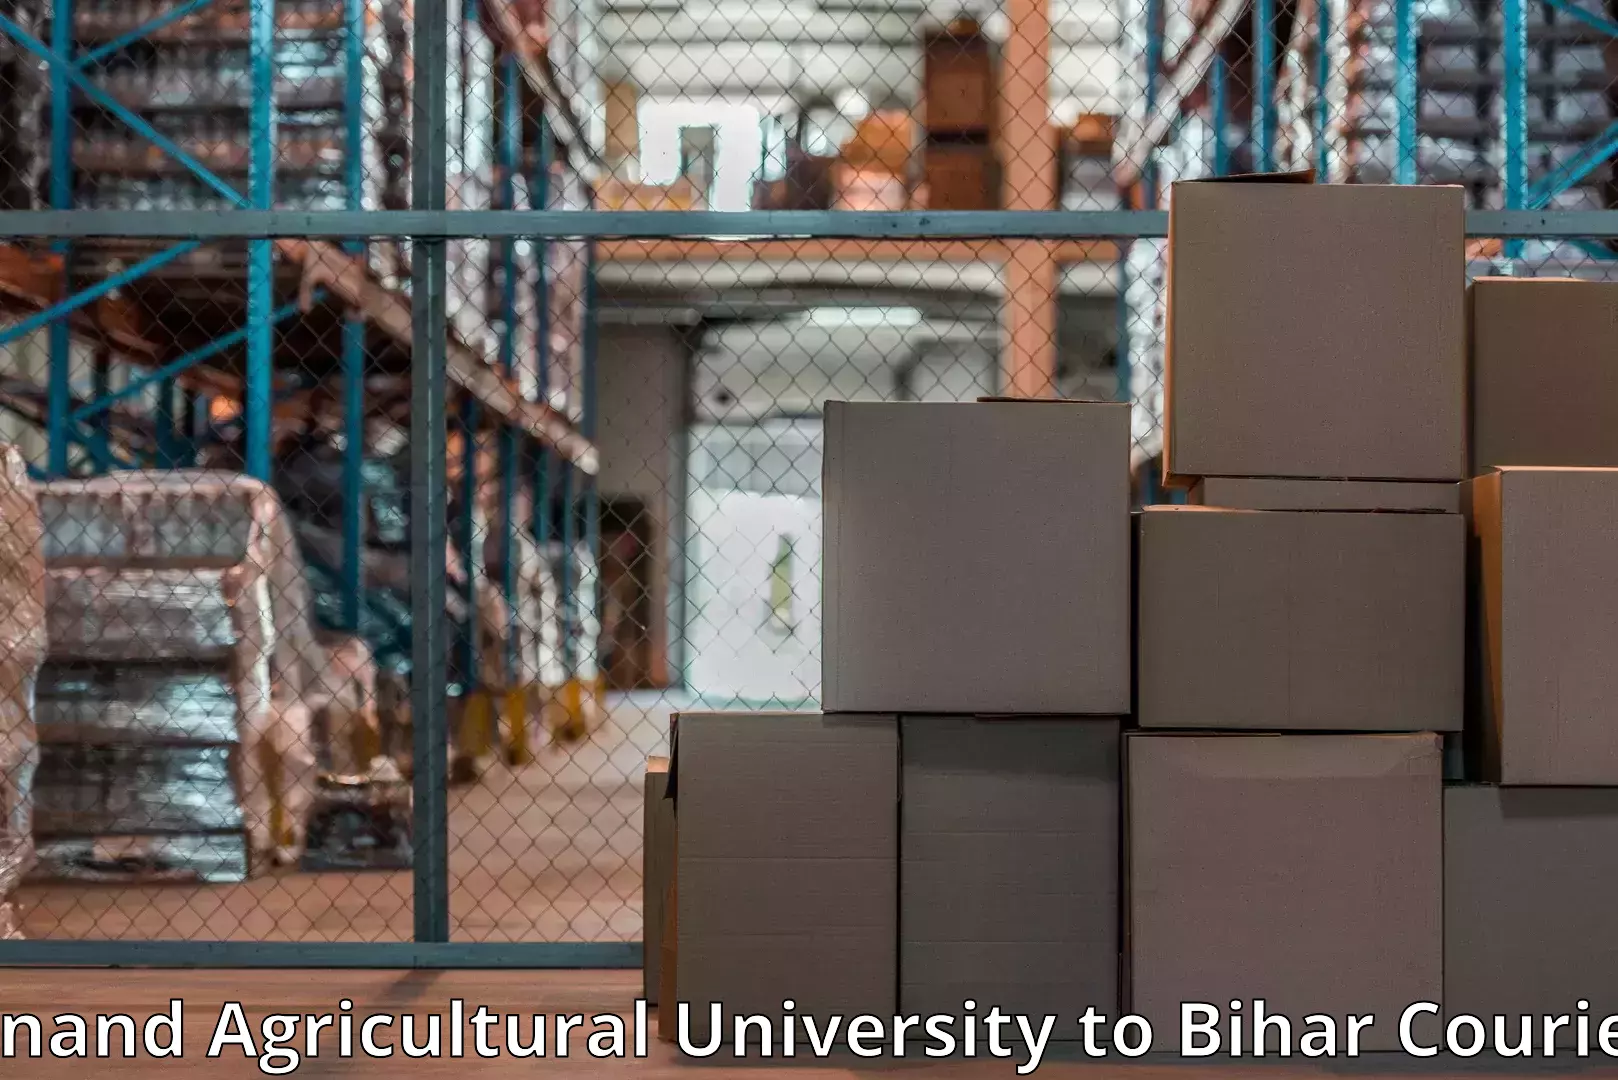 Furniture relocation services Anand Agricultural University to Runni Saidpur